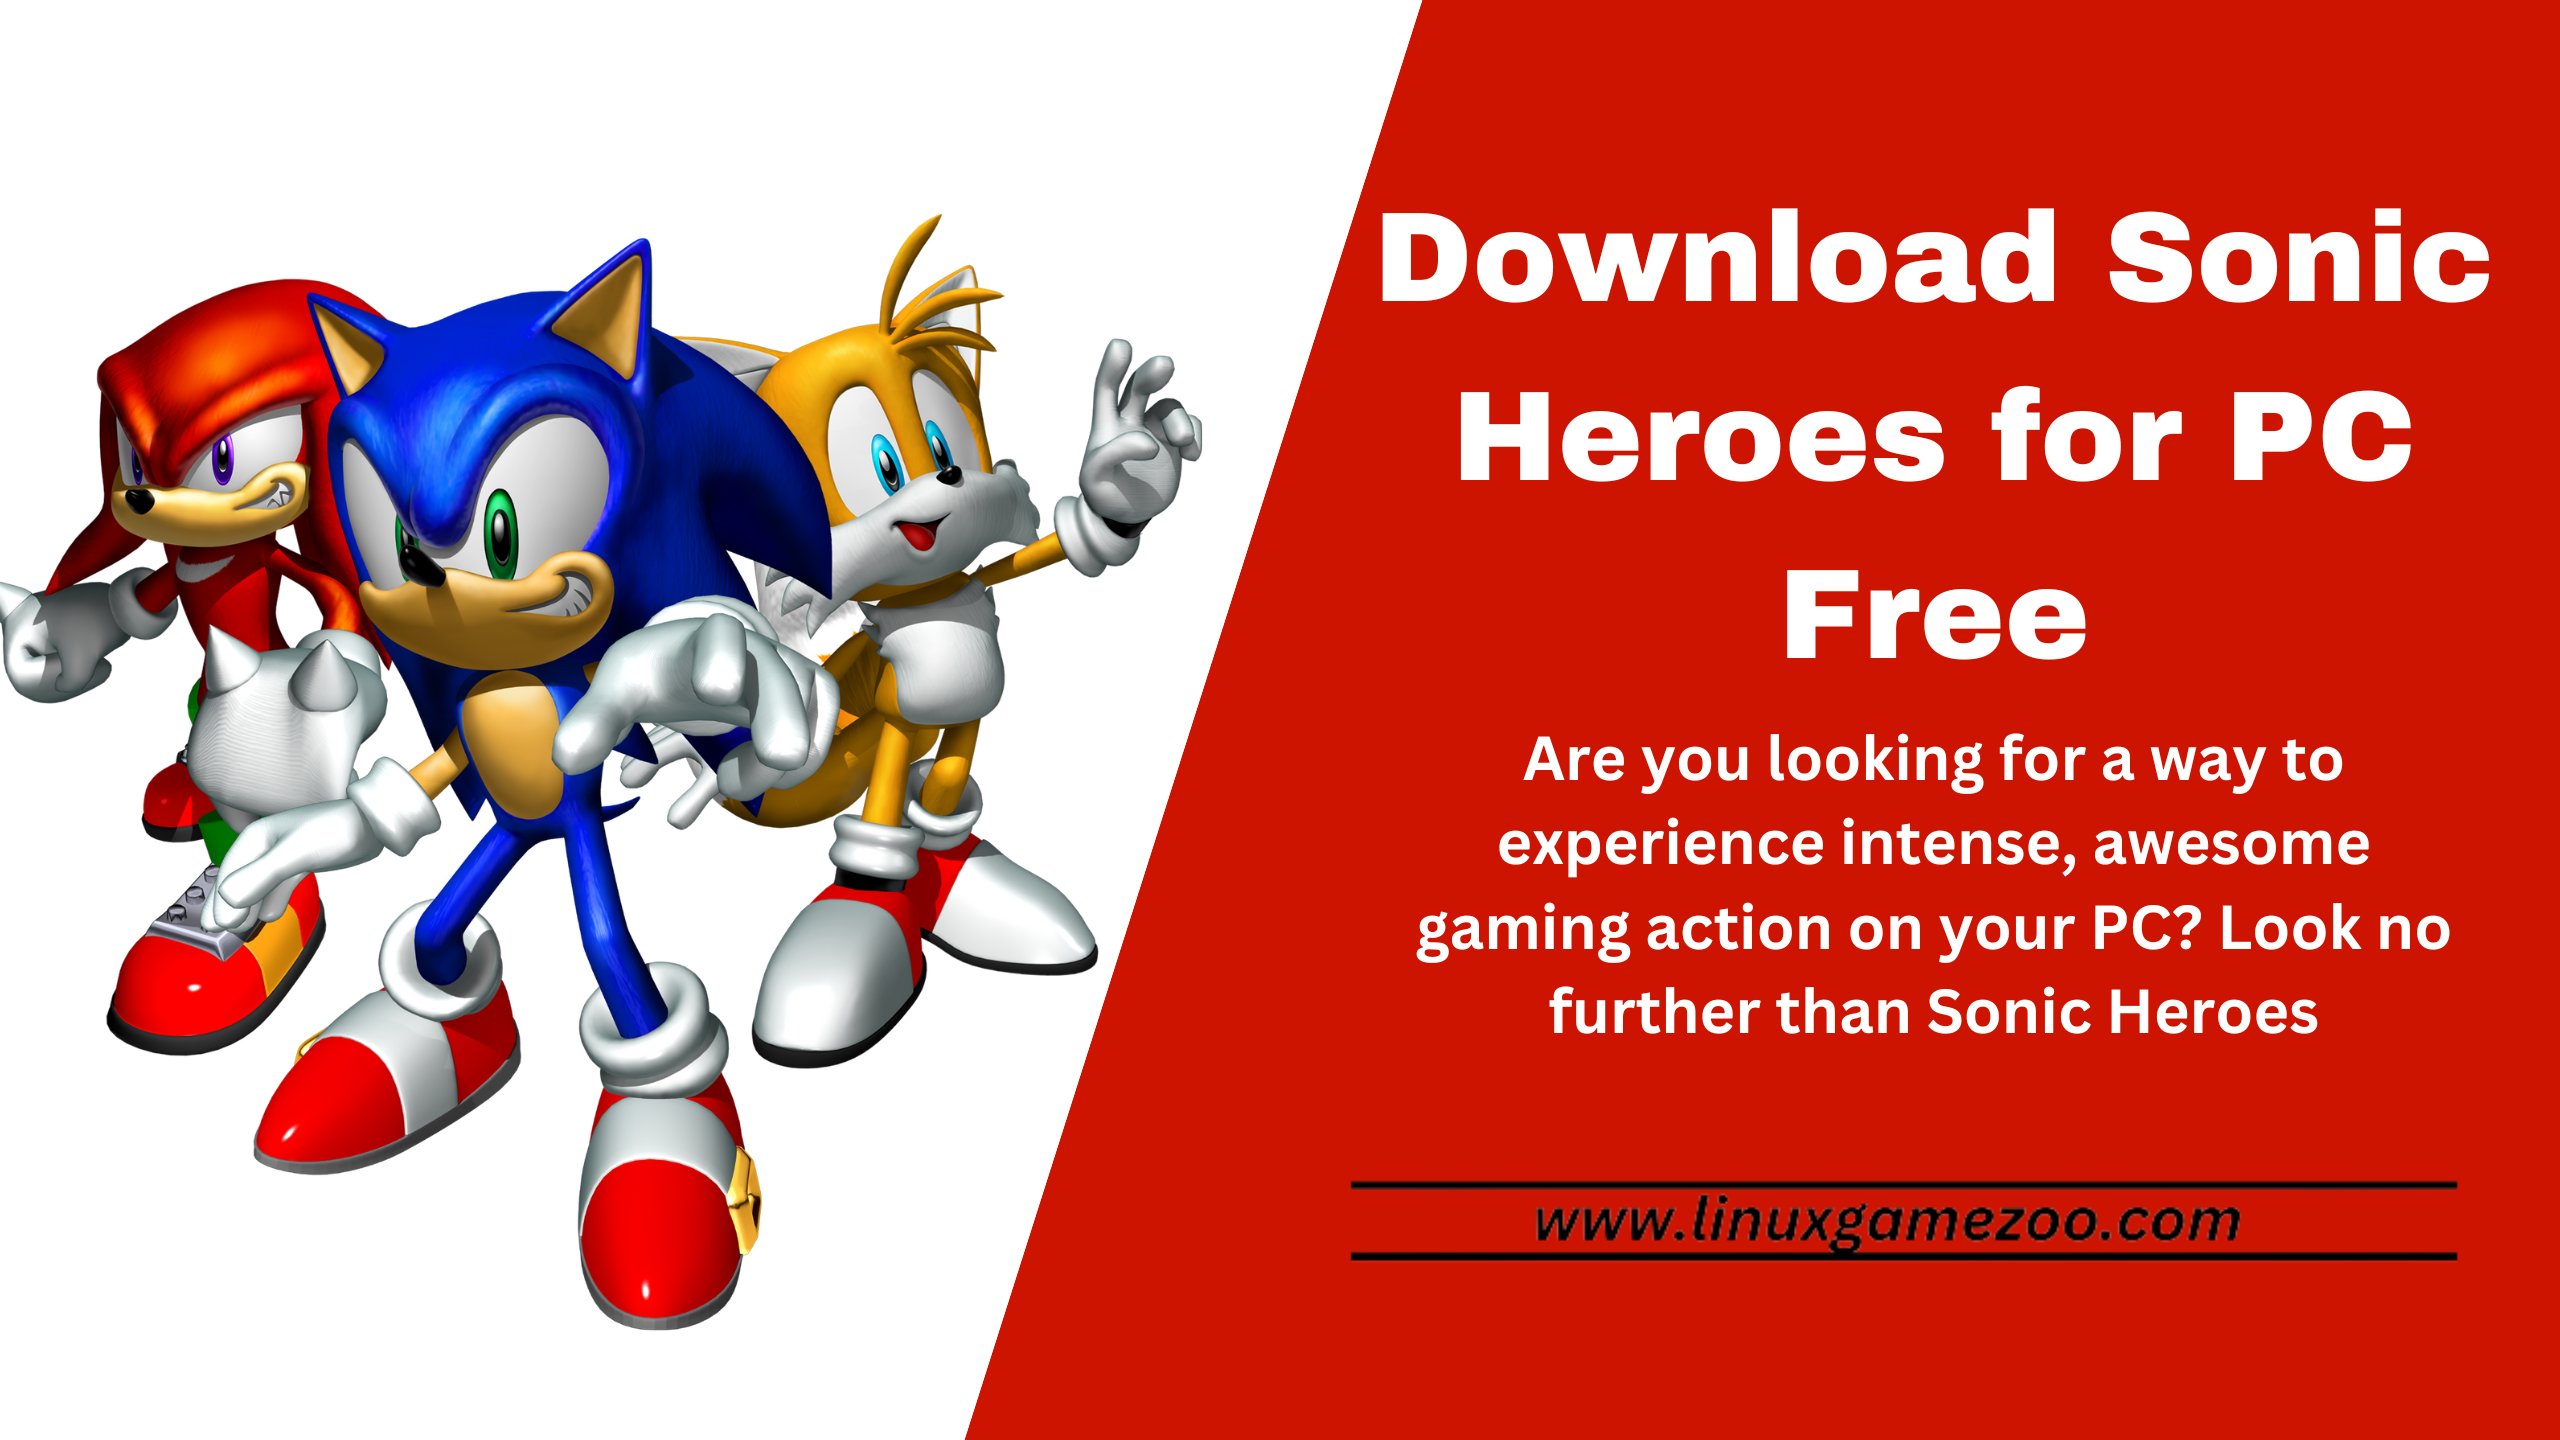 Download Sonic Heroes for PC Free